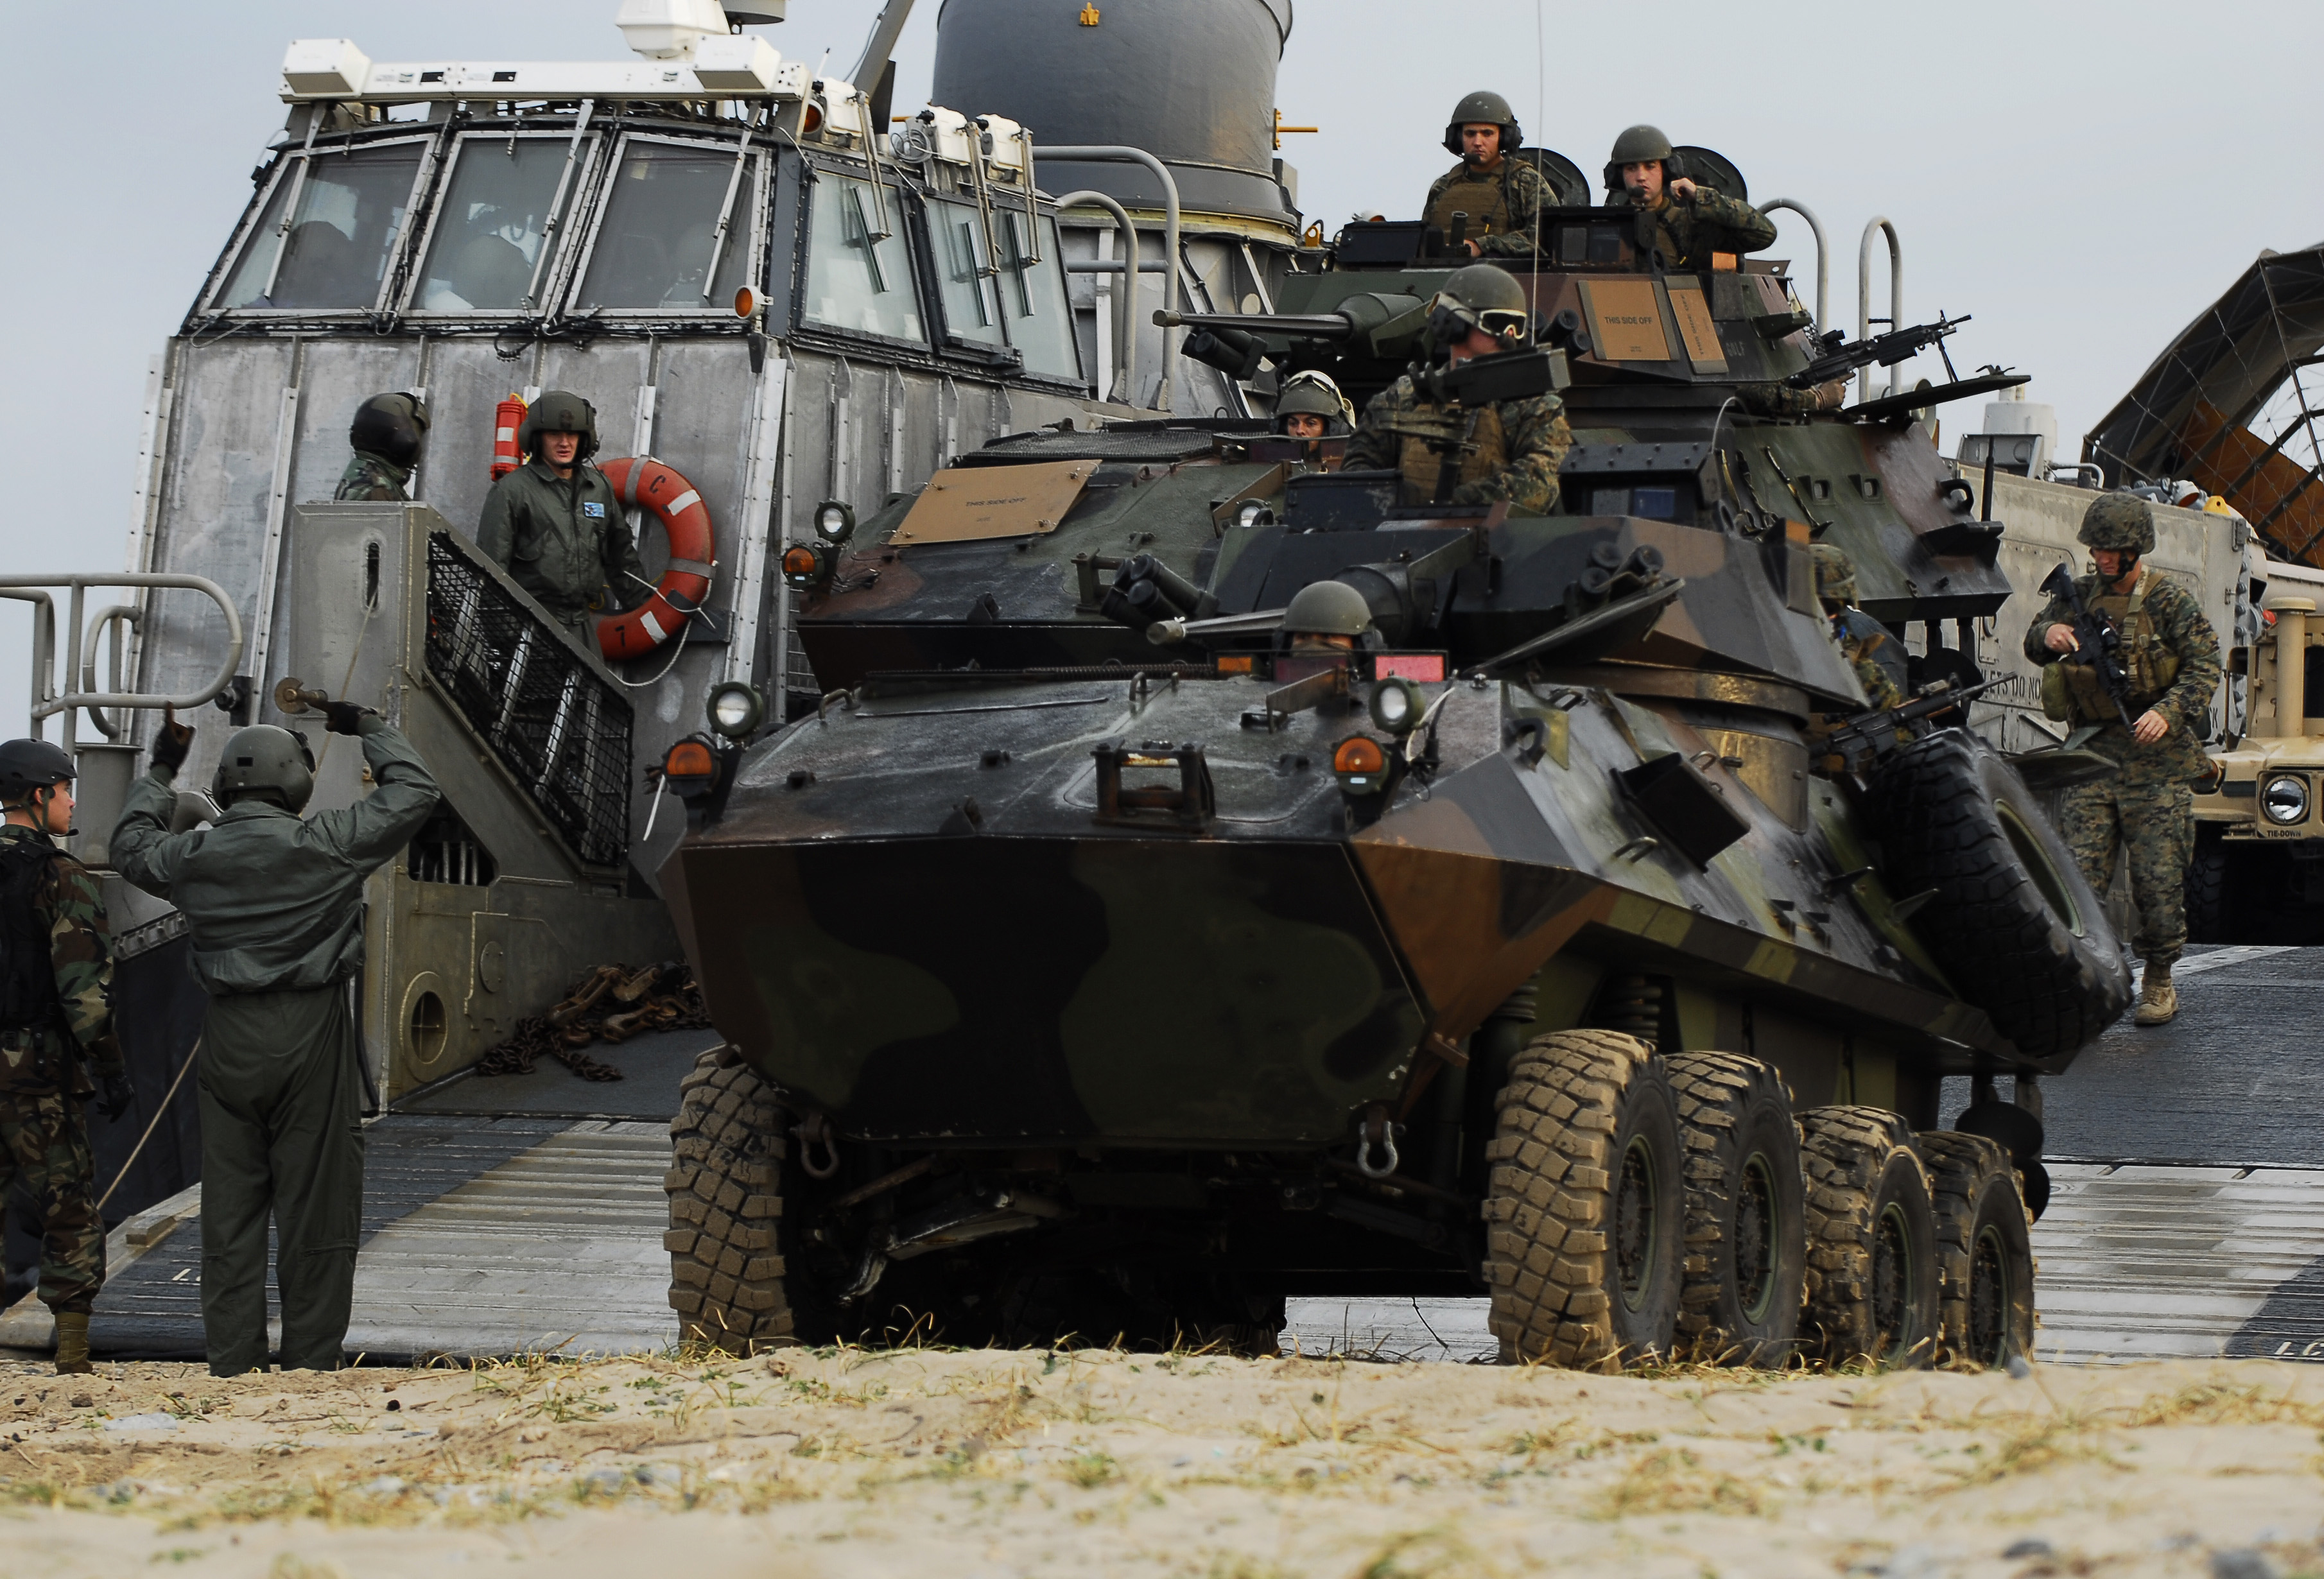 US_Navy_091104-N-0807W-159_Marines_assigned_to_the_31st_Marine_Expeditionary_Unit_%2831st_MEU%29_unload_assault_vehicles_from_a_landing_craft%2C_air_cushion_from_the_amphibious_dock_landing_ship_USS_Harpers_Ferry_%28LSD_49%29.jpg